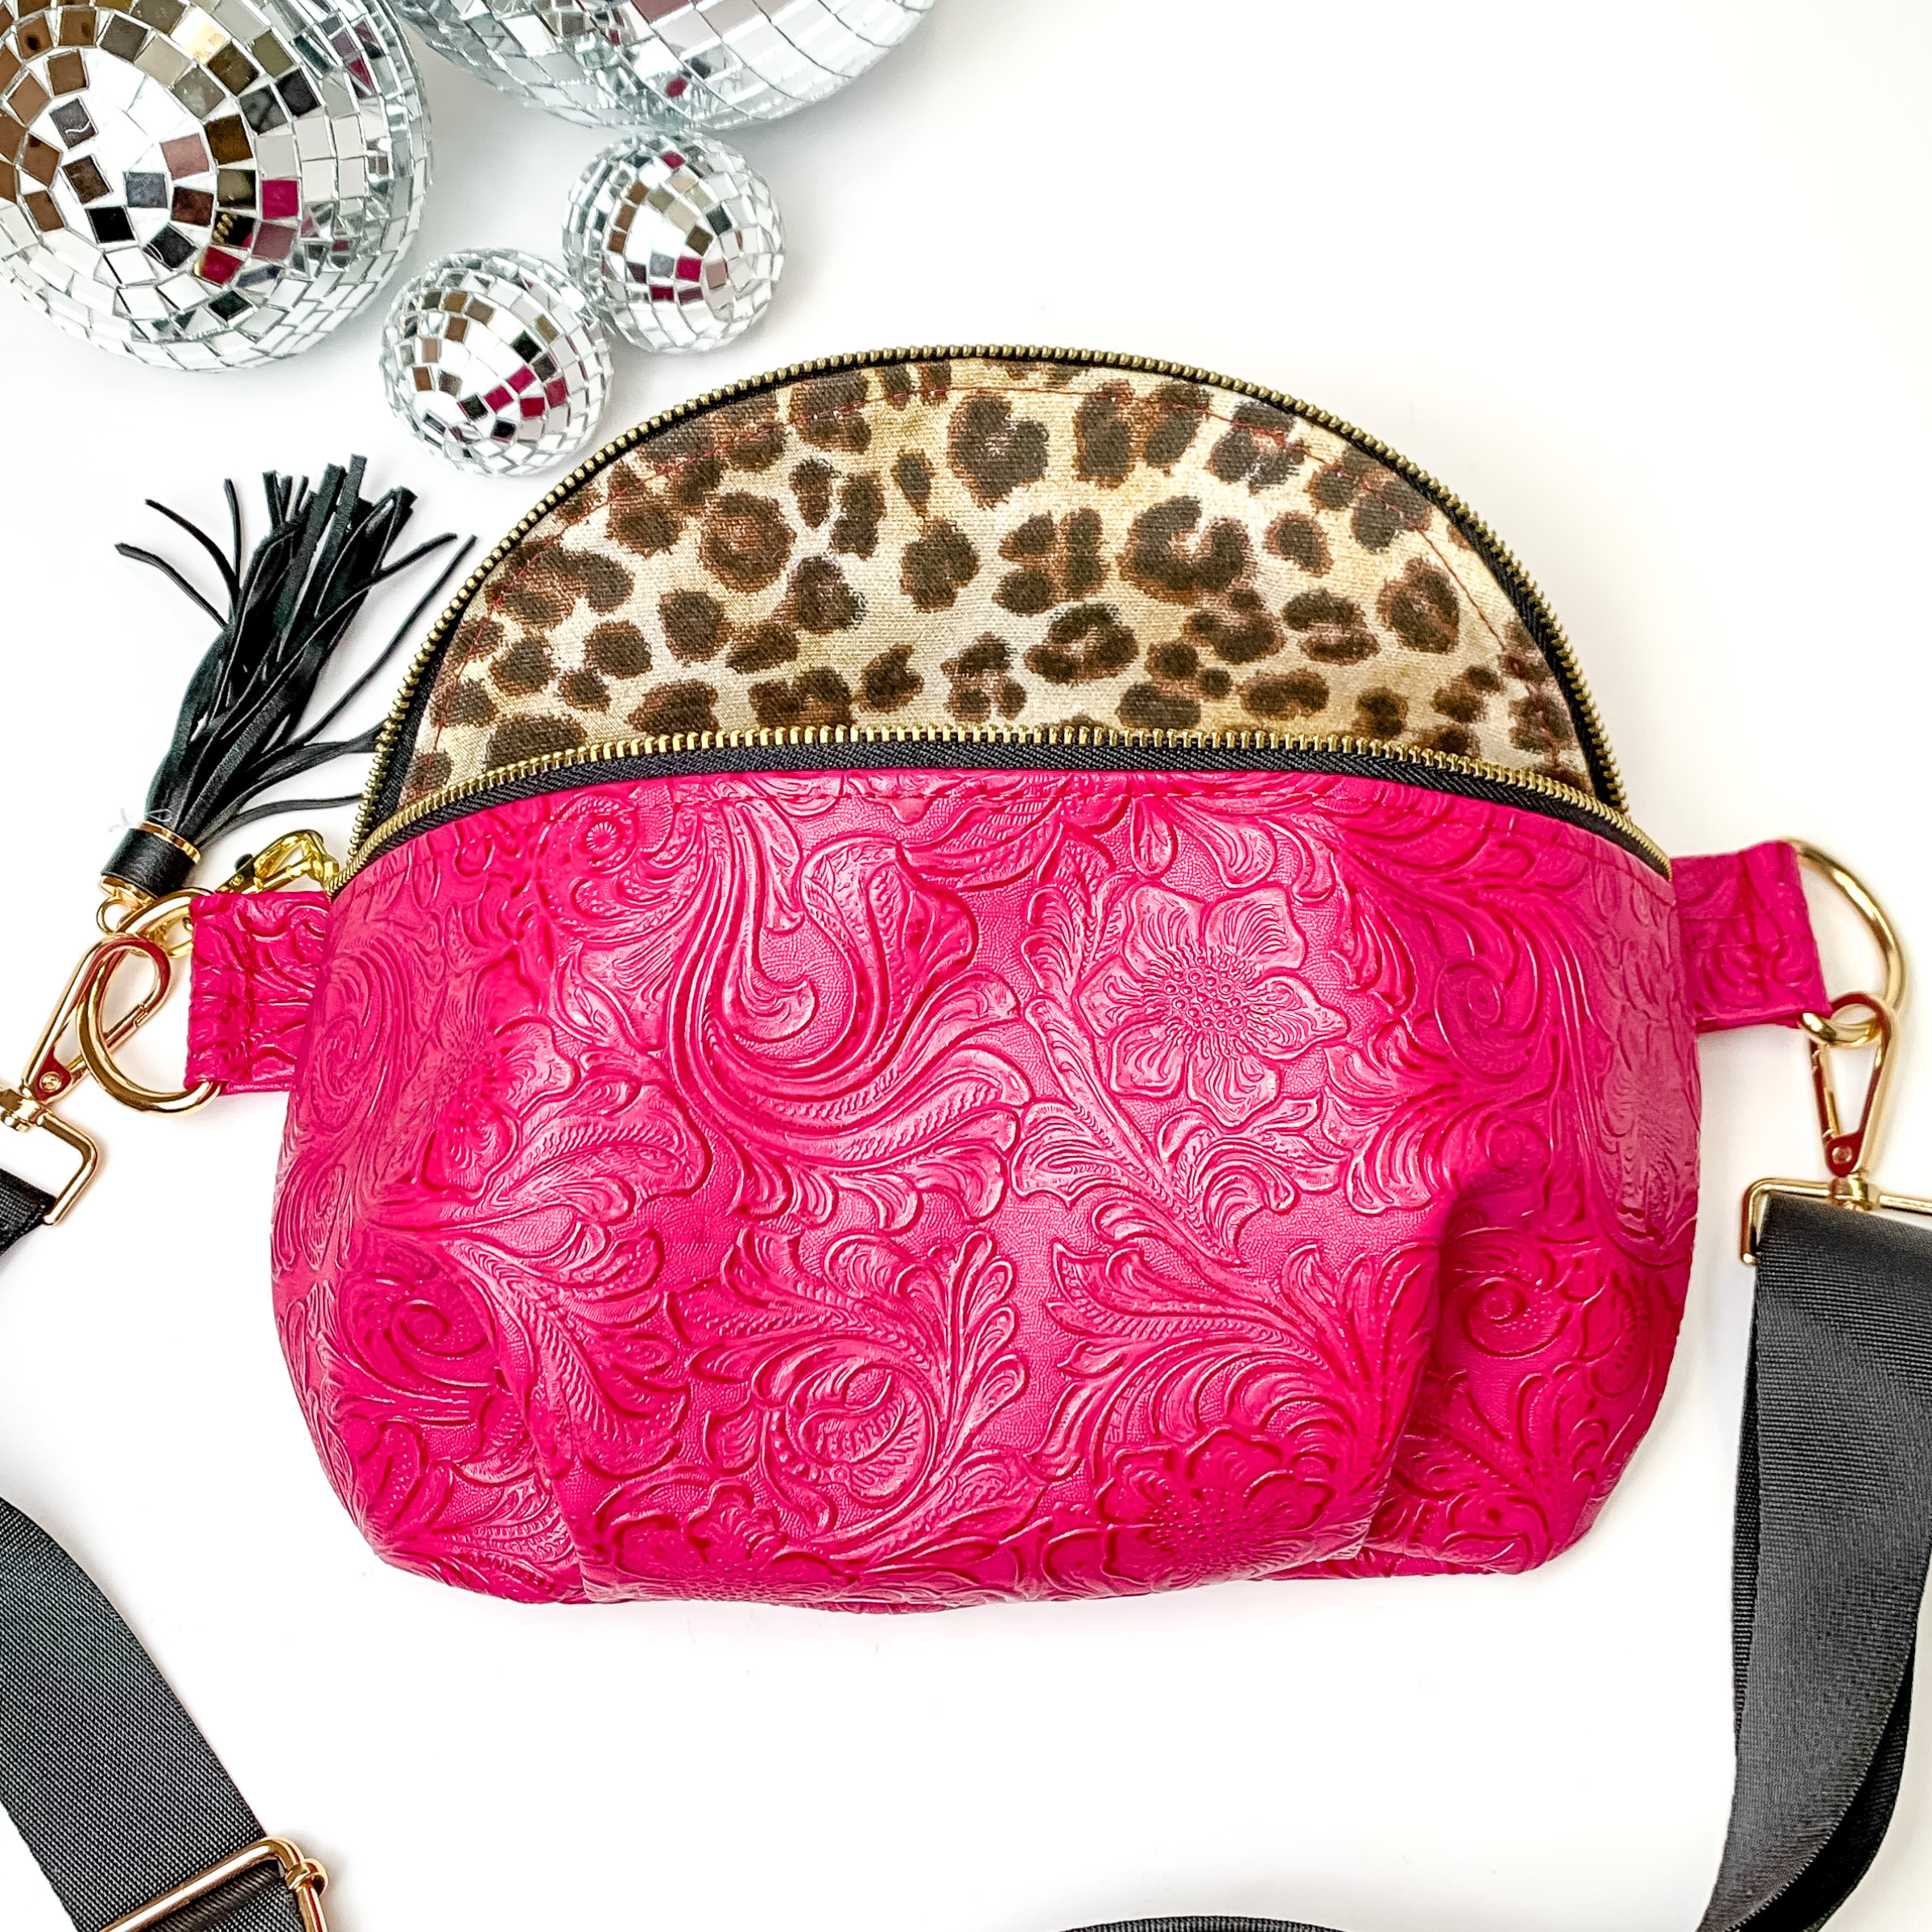 Makeup Junkie | MJ Dream Sidekick with Adjustable Strap in Hot Pink Tooled Print - Giddy Up Glamour Boutique